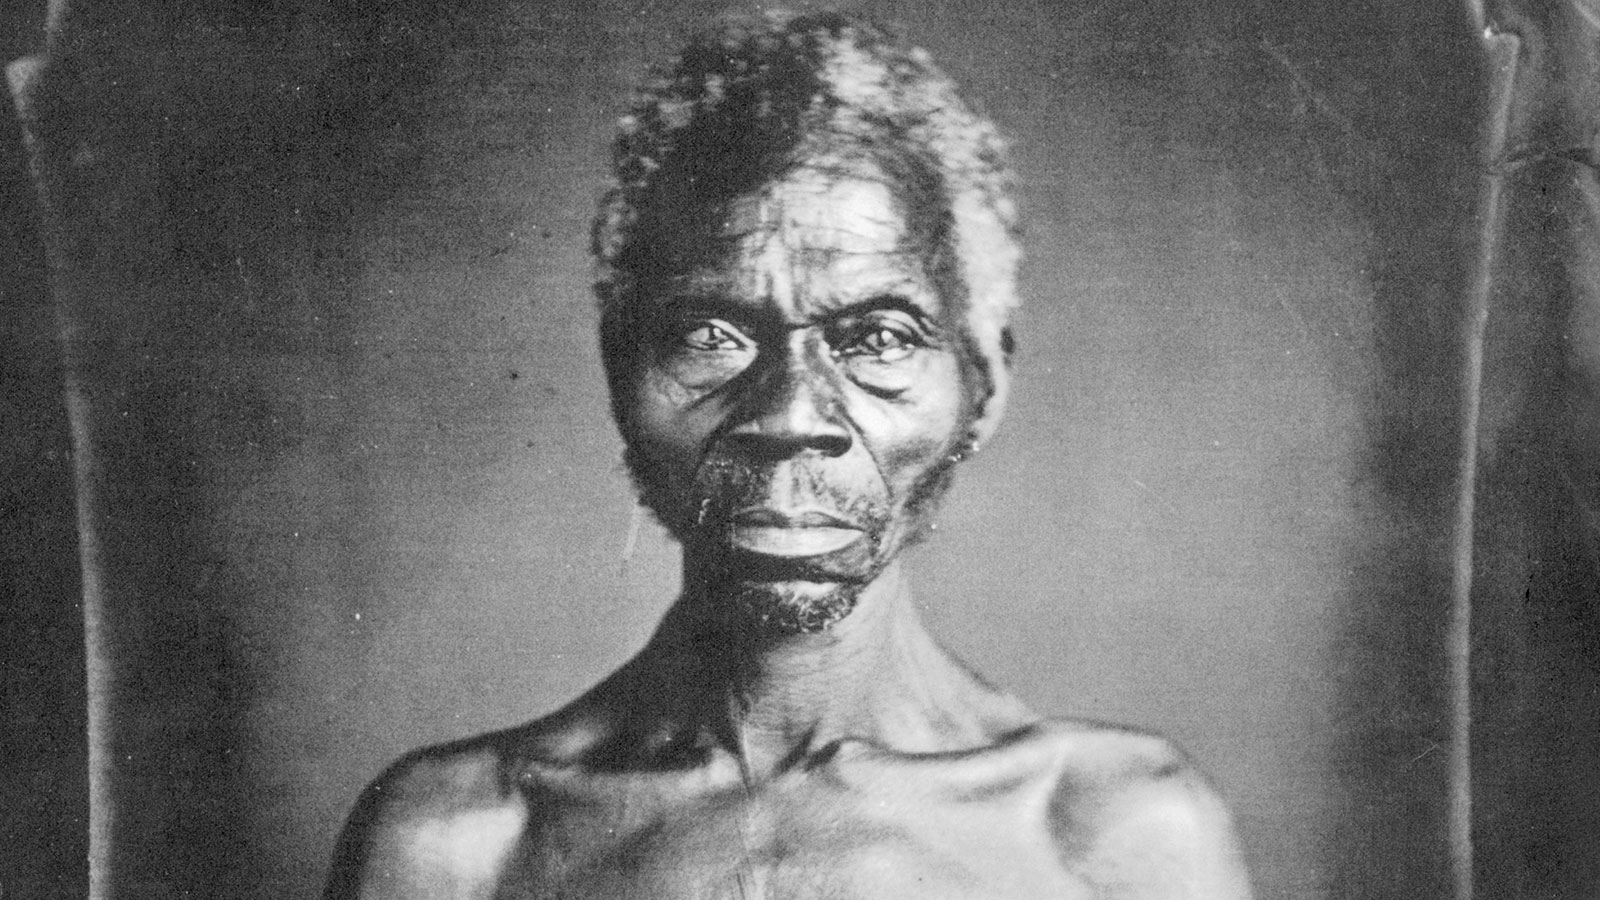 A racist Harvard scientist commissioned photos of enslaved people. One possible descendant wants to reclaim their story.